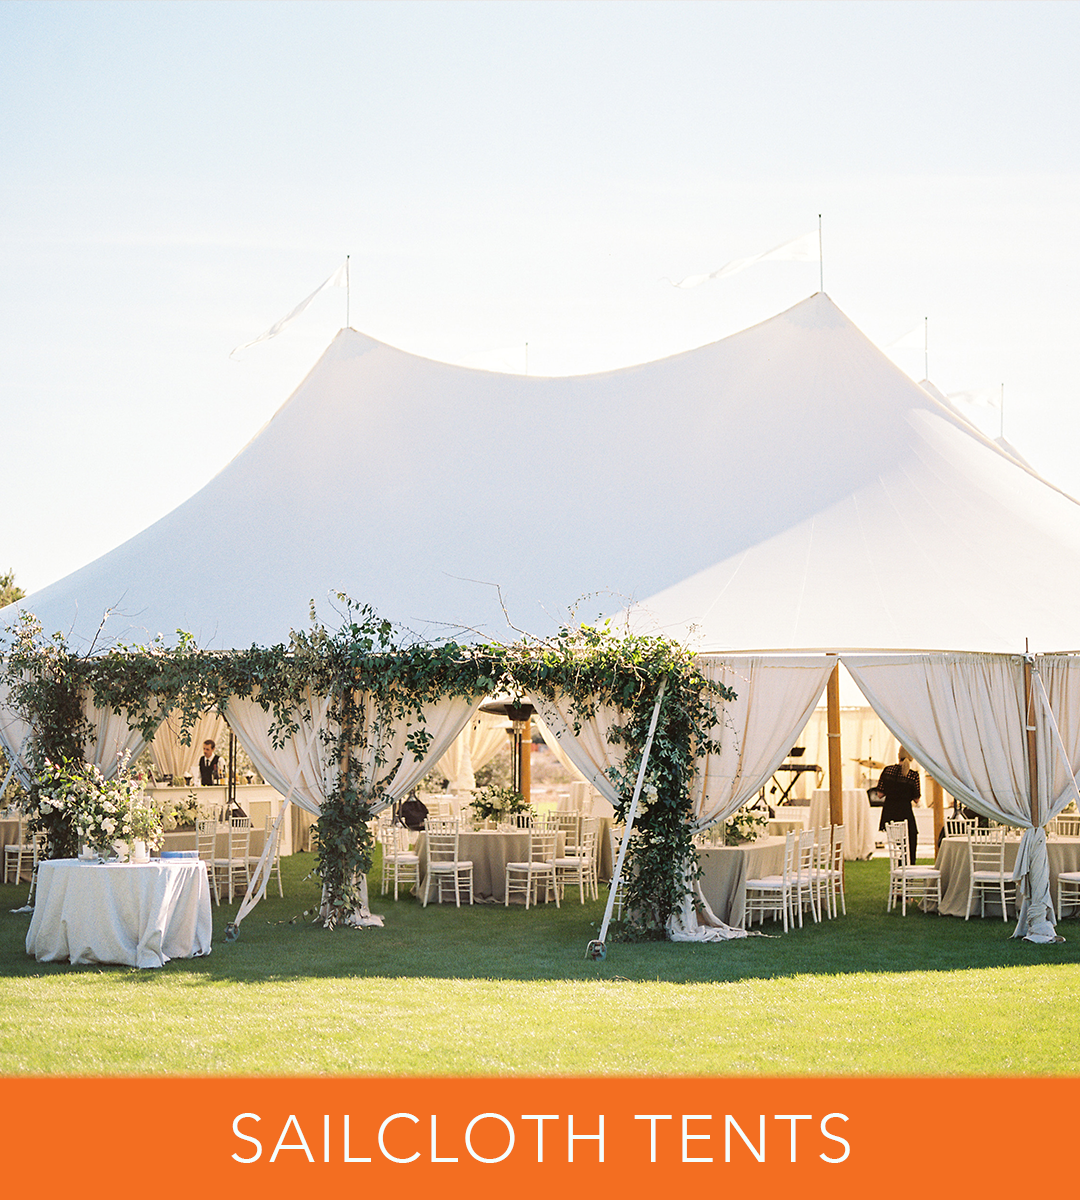 Sailcloth Tents are full of character + style!